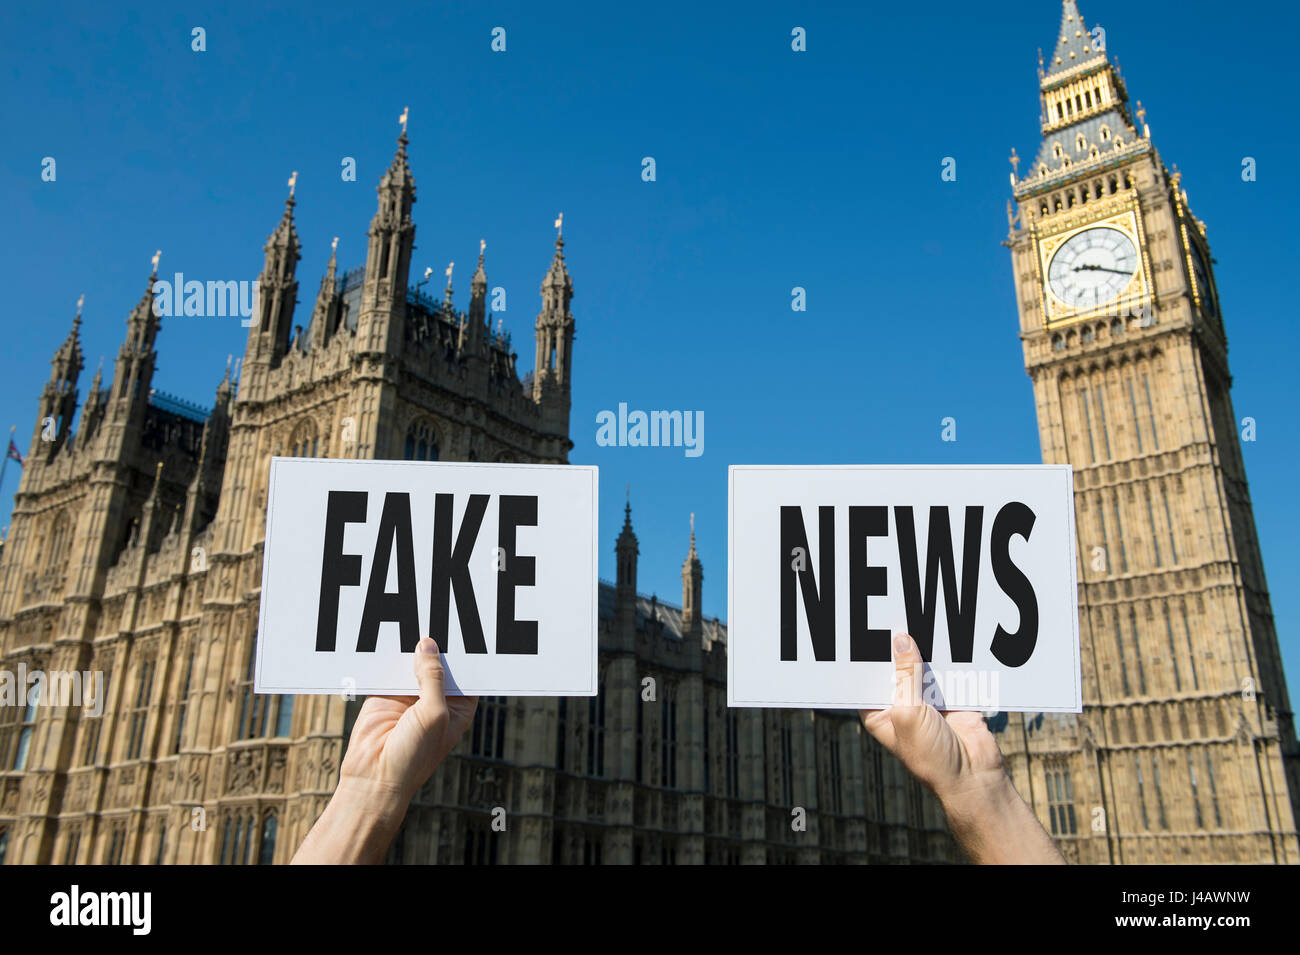 Hands holding sign protesting fake news in front of the Houses of Parliament at Westminster Palace in London, England Stock Photo